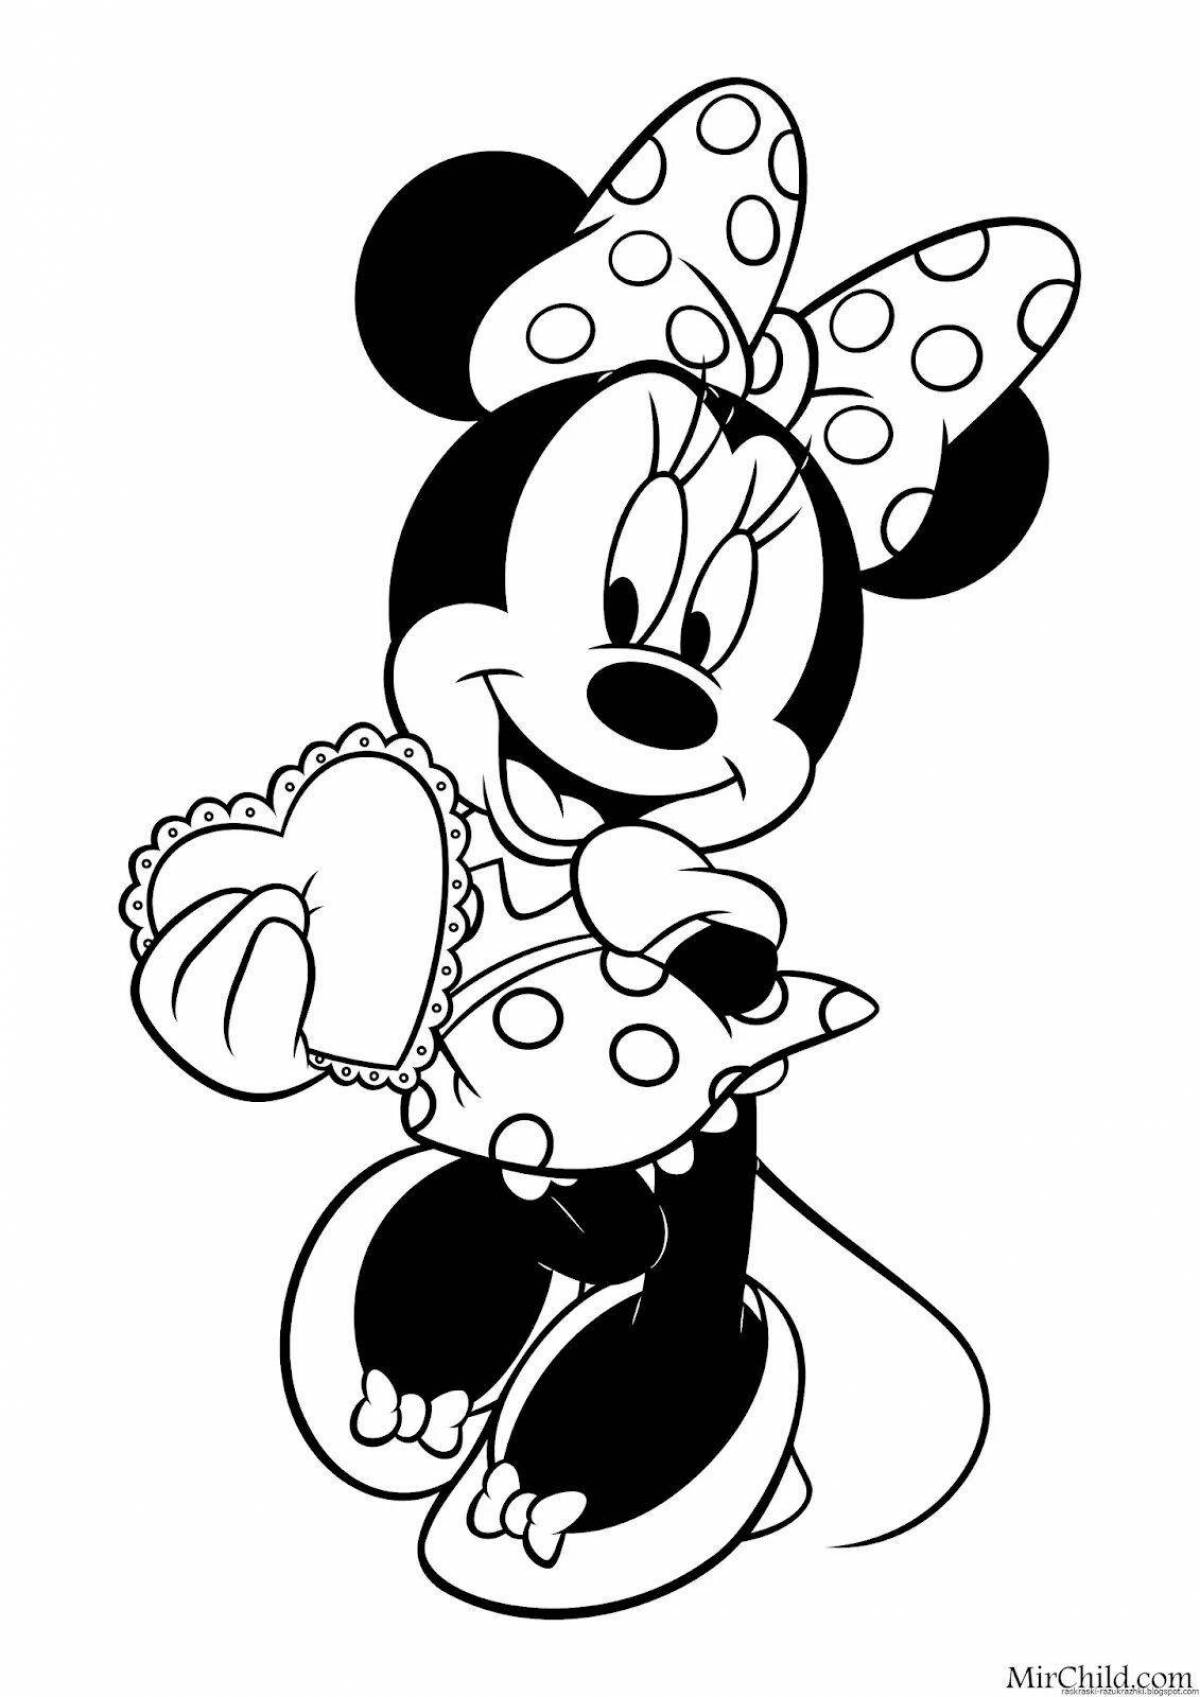 Coloring book shiny minnie mouse